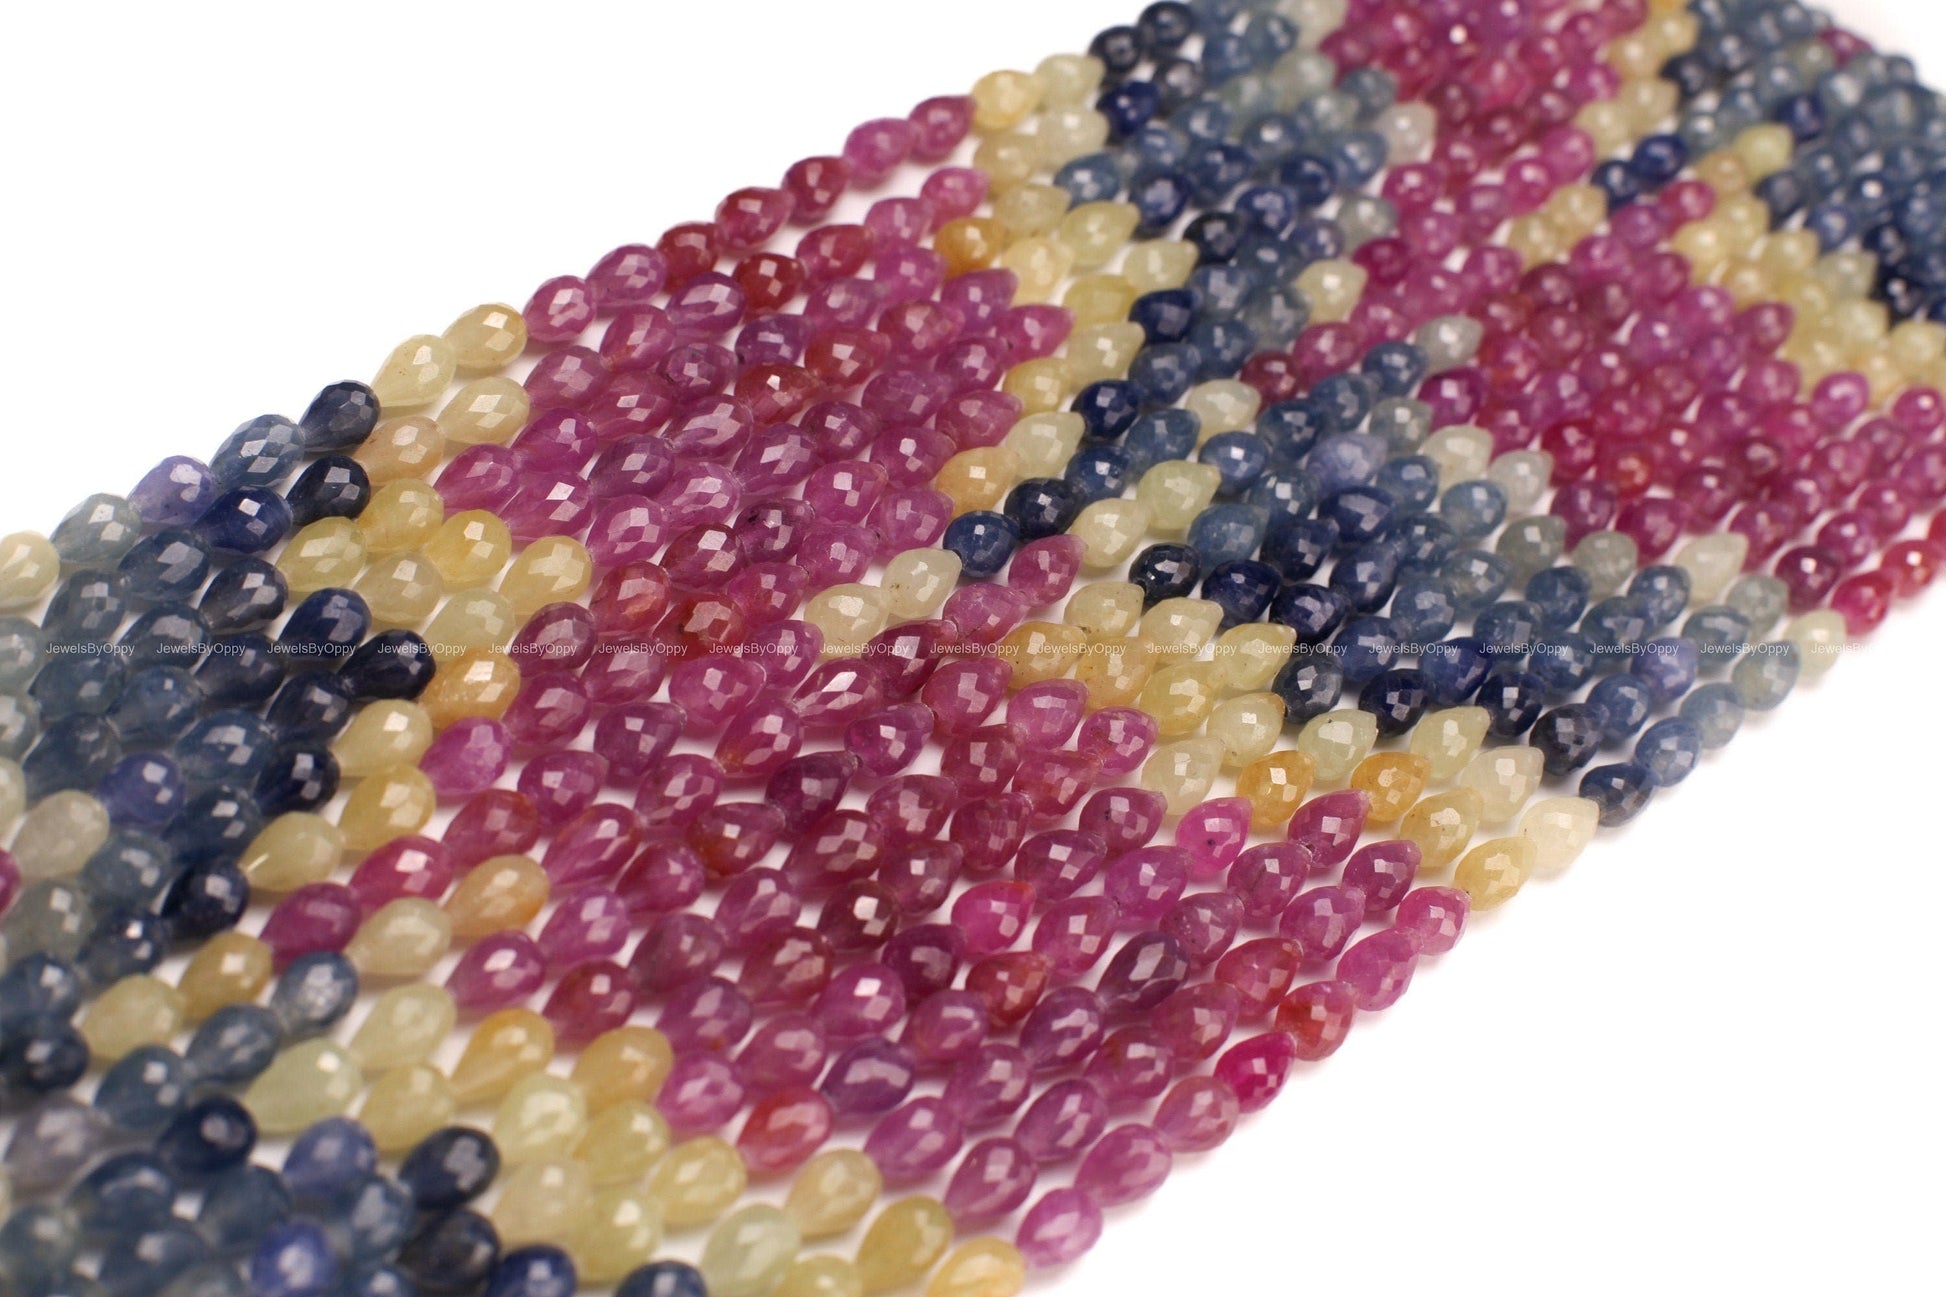 Multi Sapphire Briolette, Natural Multi Sapphire Micro Faceted Teardrop 5x7-8mm Briolette tol to bottom driled Jewelry Making Gemstone Bead